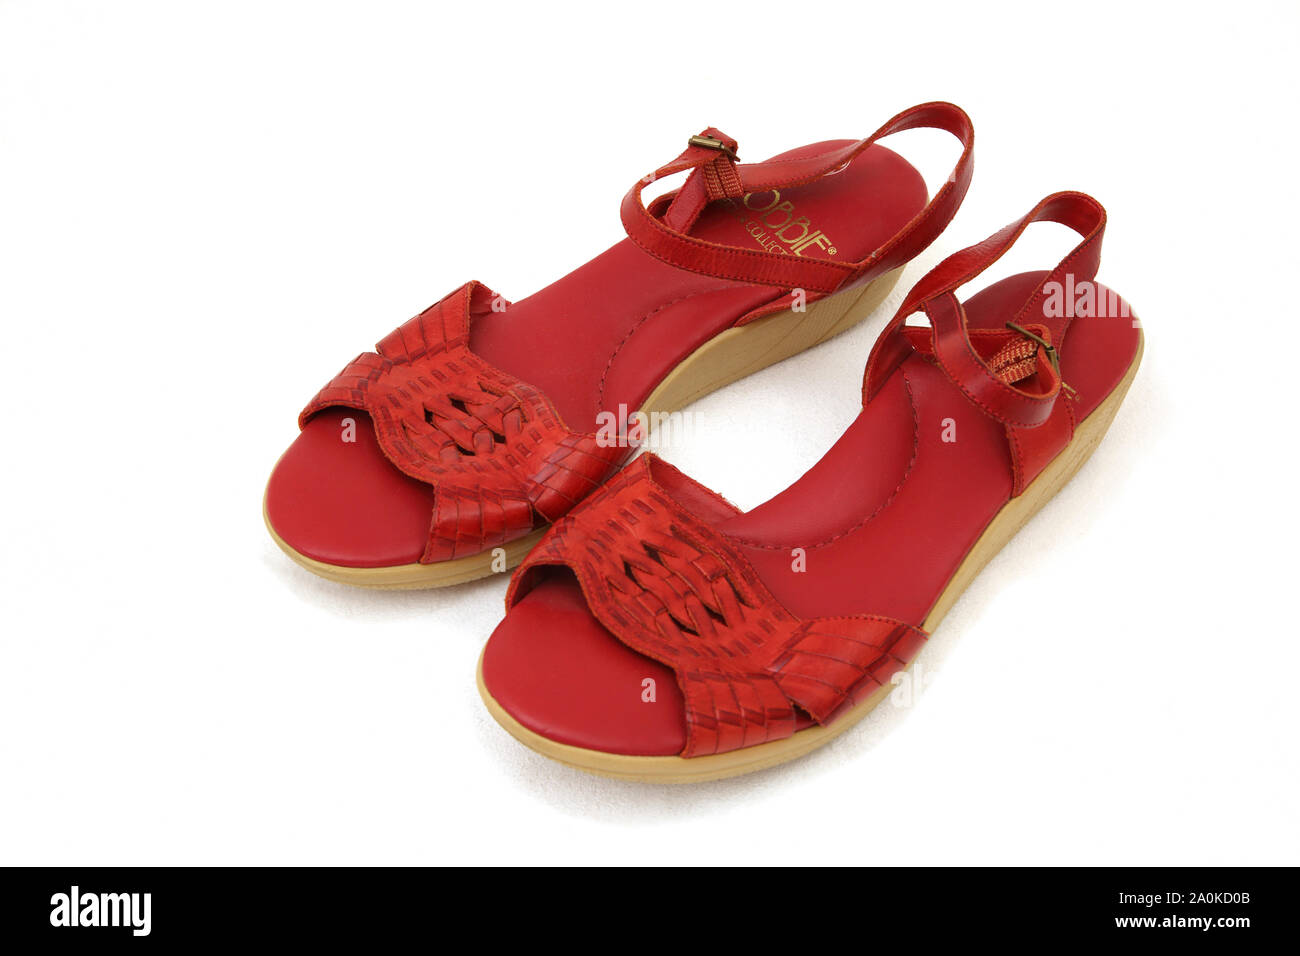 Red Leather open Toe Sandals with Wedge Heel Stock Photo